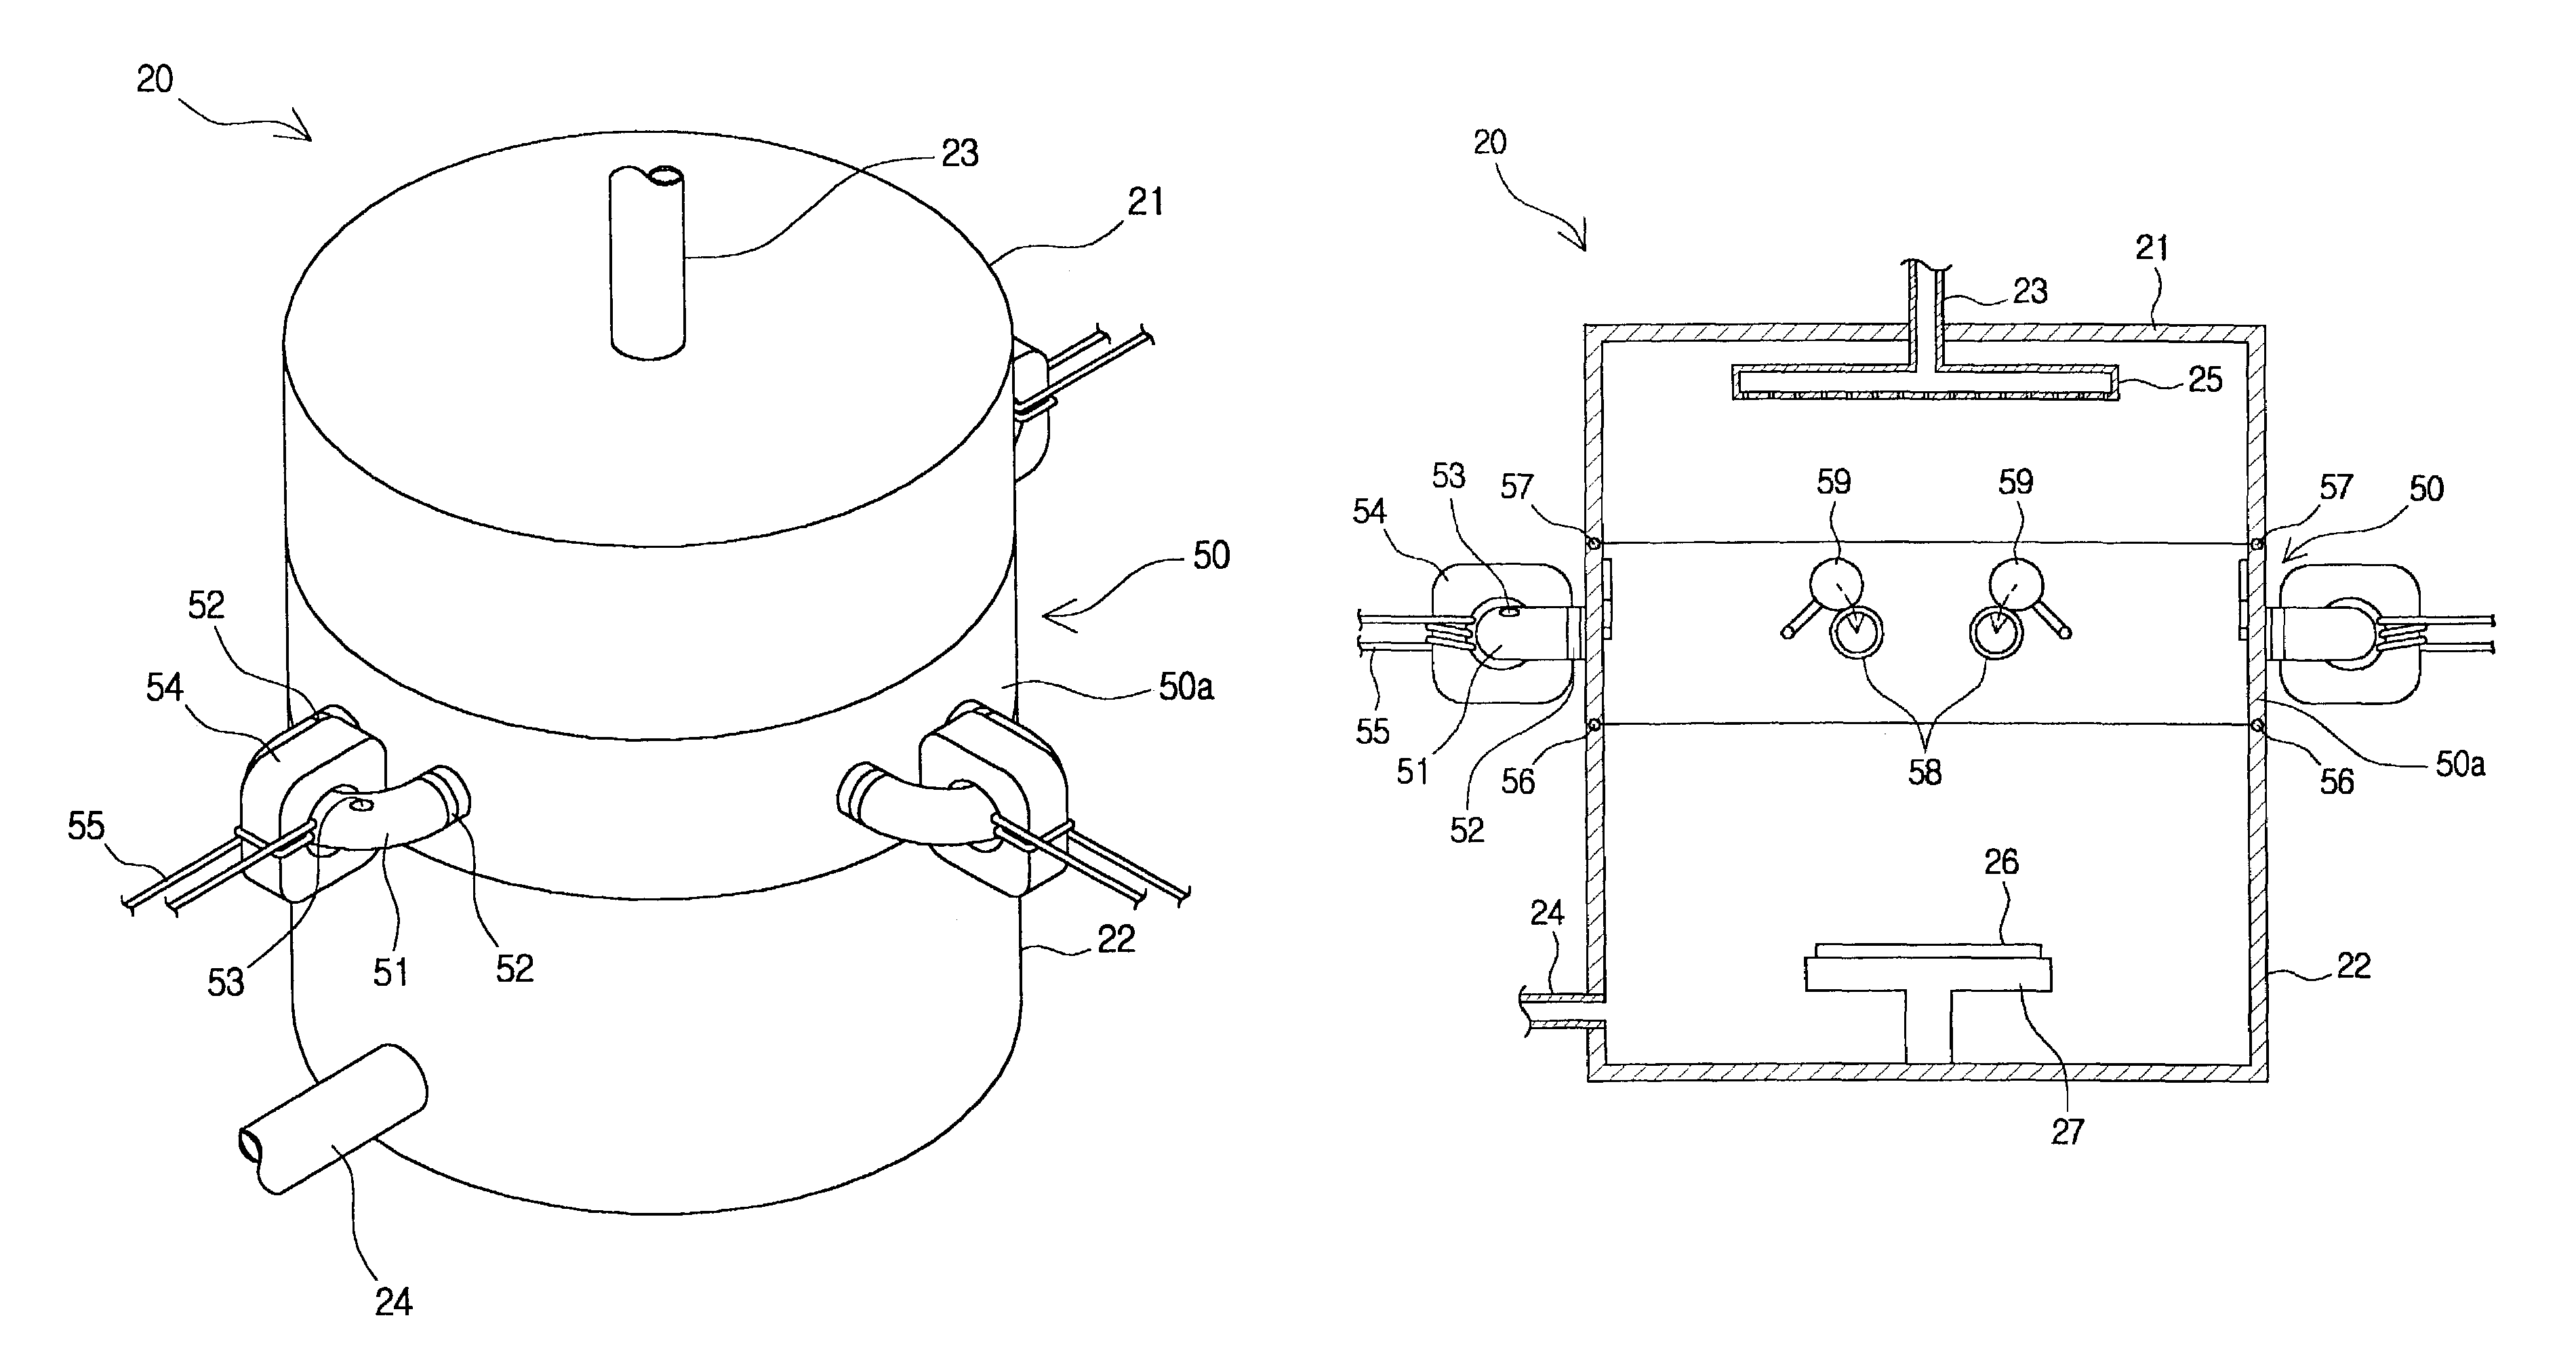 Plasma process chamber and system